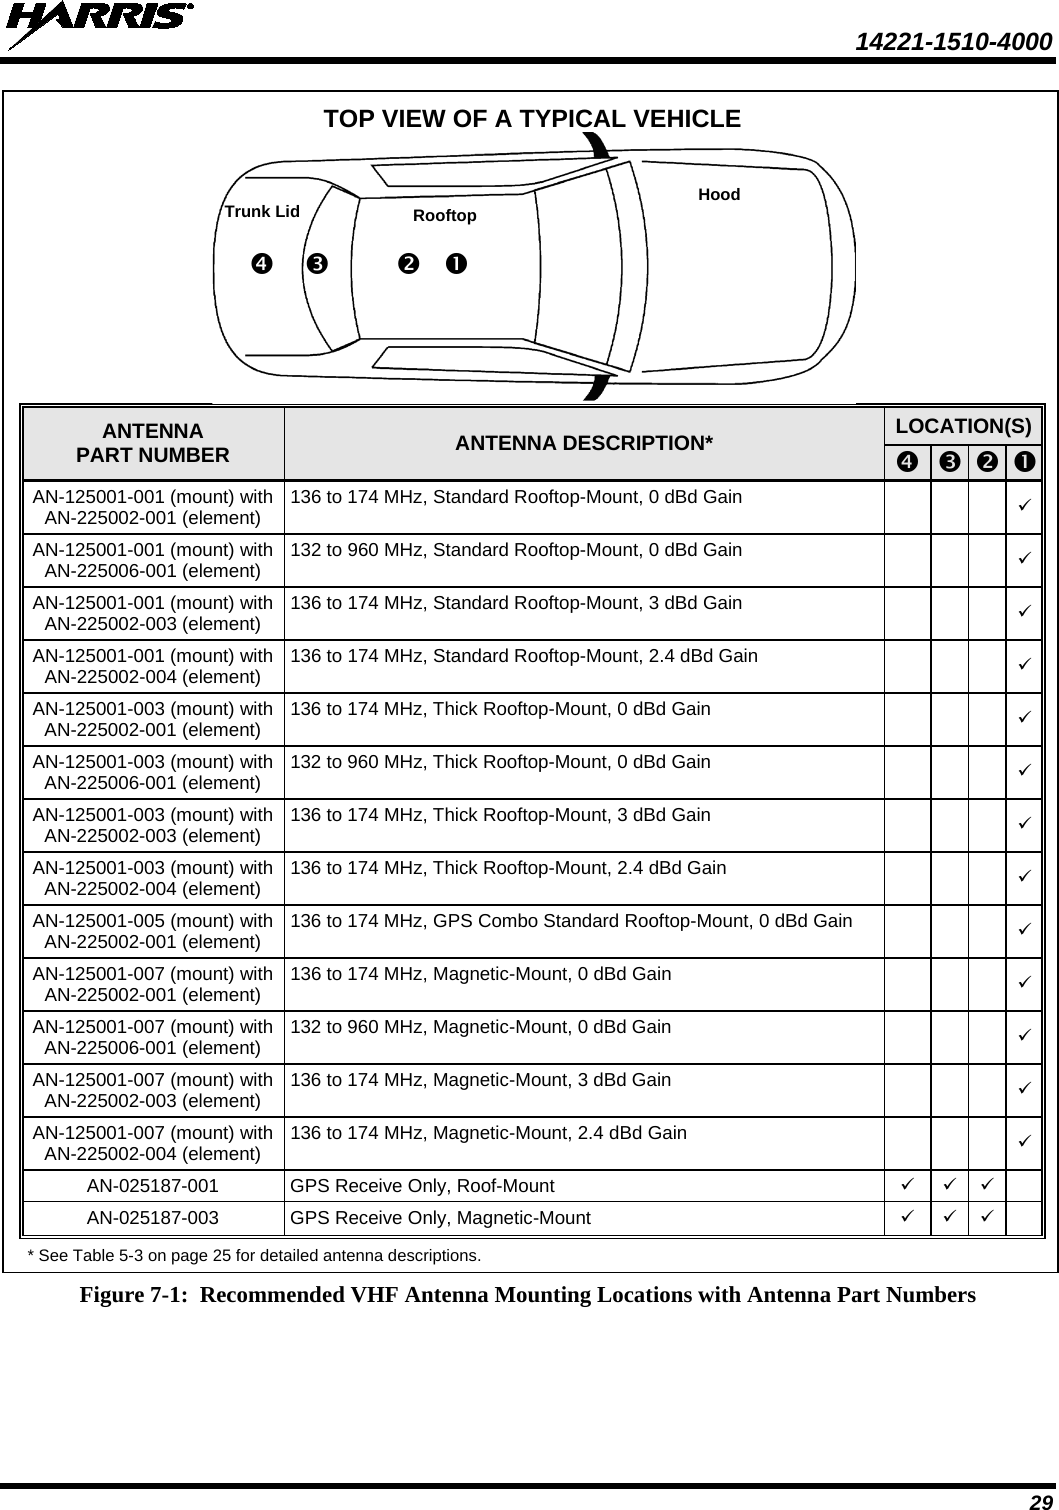  14221-1510-4000 29  TOP VIEW OF A TYPICAL VEHICLE    ANTENNA PART NUMBER ANTENNA DESCRIPTION*  LOCATION(S)         AN-125001-001 (mount) with AN-225002-001 (element) 136 to 174 MHz, Standard Rooftop-Mount, 0 dBd Gain          AN-125001-001 (mount) with AN-225006-001 (element) 132 to 960 MHz, Standard Rooftop-Mount, 0 dBd Gain          AN-125001-001 (mount) with AN-225002-003 (element) 136 to 174 MHz, Standard Rooftop-Mount, 3 dBd Gain          AN-125001-001 (mount) with AN-225002-004 (element) 136 to 174 MHz, Standard Rooftop-Mount, 2.4 dBd Gain          AN-125001-003 (mount) with AN-225002-001 (element) 136 to 174 MHz, Thick Rooftop-Mount, 0 dBd Gain          AN-125001-003 (mount) with AN-225006-001 (element) 132 to 960 MHz, Thick Rooftop-Mount, 0 dBd Gain          AN-125001-003 (mount) with AN-225002-003 (element) 136 to 174 MHz, Thick Rooftop-Mount, 3 dBd Gain          AN-125001-003 (mount) with AN-225002-004 (element) 136 to 174 MHz, Thick Rooftop-Mount, 2.4 dBd Gain          AN-125001-005 (mount) with AN-225002-001 (element) 136 to 174 MHz, GPS Combo Standard Rooftop-Mount, 0 dBd Gain          AN-125001-007 (mount) with AN-225002-001 (element) 136 to 174 MHz, Magnetic-Mount, 0 dBd Gain          AN-125001-007 (mount) with AN-225006-001 (element) 132 to 960 MHz, Magnetic-Mount, 0 dBd Gain          AN-125001-007 (mount) with AN-225002-003 (element) 136 to 174 MHz, Magnetic-Mount, 3 dBd Gain          AN-125001-007 (mount) with AN-225002-004 (element) 136 to 174 MHz, Magnetic-Mount, 2.4 dBd Gain          AN-025187-001 GPS Receive Only, Roof-Mount       AN-025187-003 GPS Receive Only, Magnetic-Mount       * See Table 5-3 on page 25 for detailed antenna descriptions.         Figure 7-1:  Recommended VHF Antenna Mounting Locations with Antenna Part Numbers  Trunk Lid Rooftop Hood                      